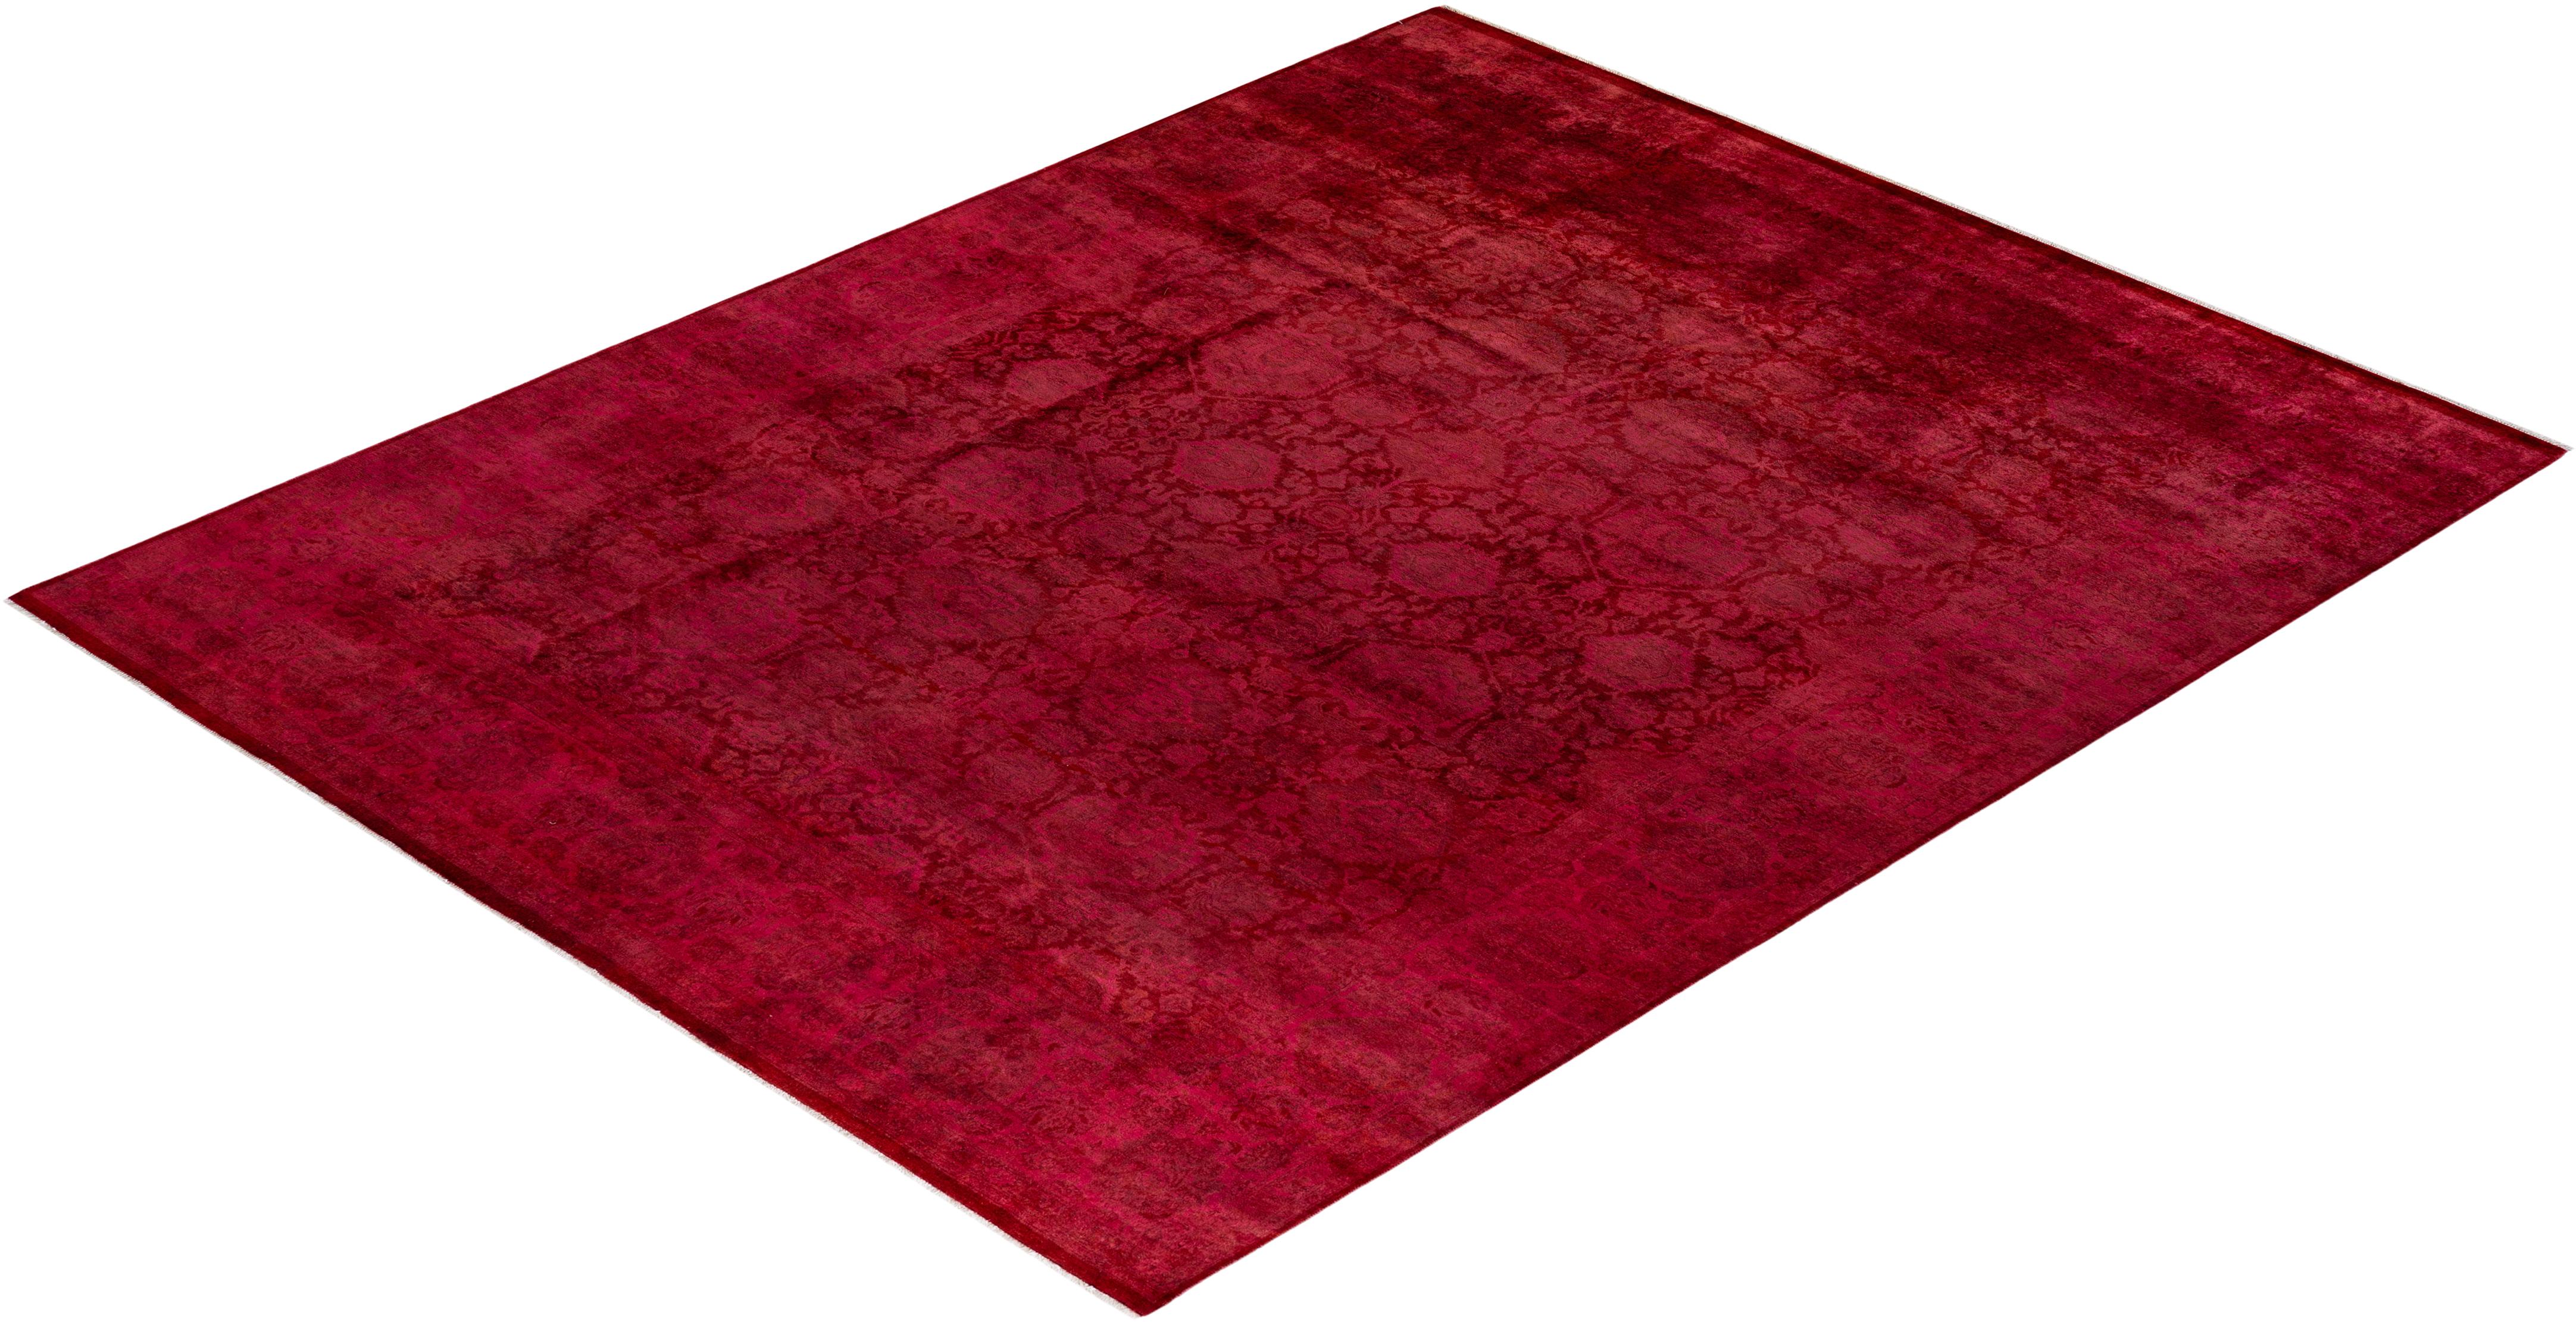 Contemporary Overdyed Hand Knotted Wool Pink Area Rug im Angebot 2